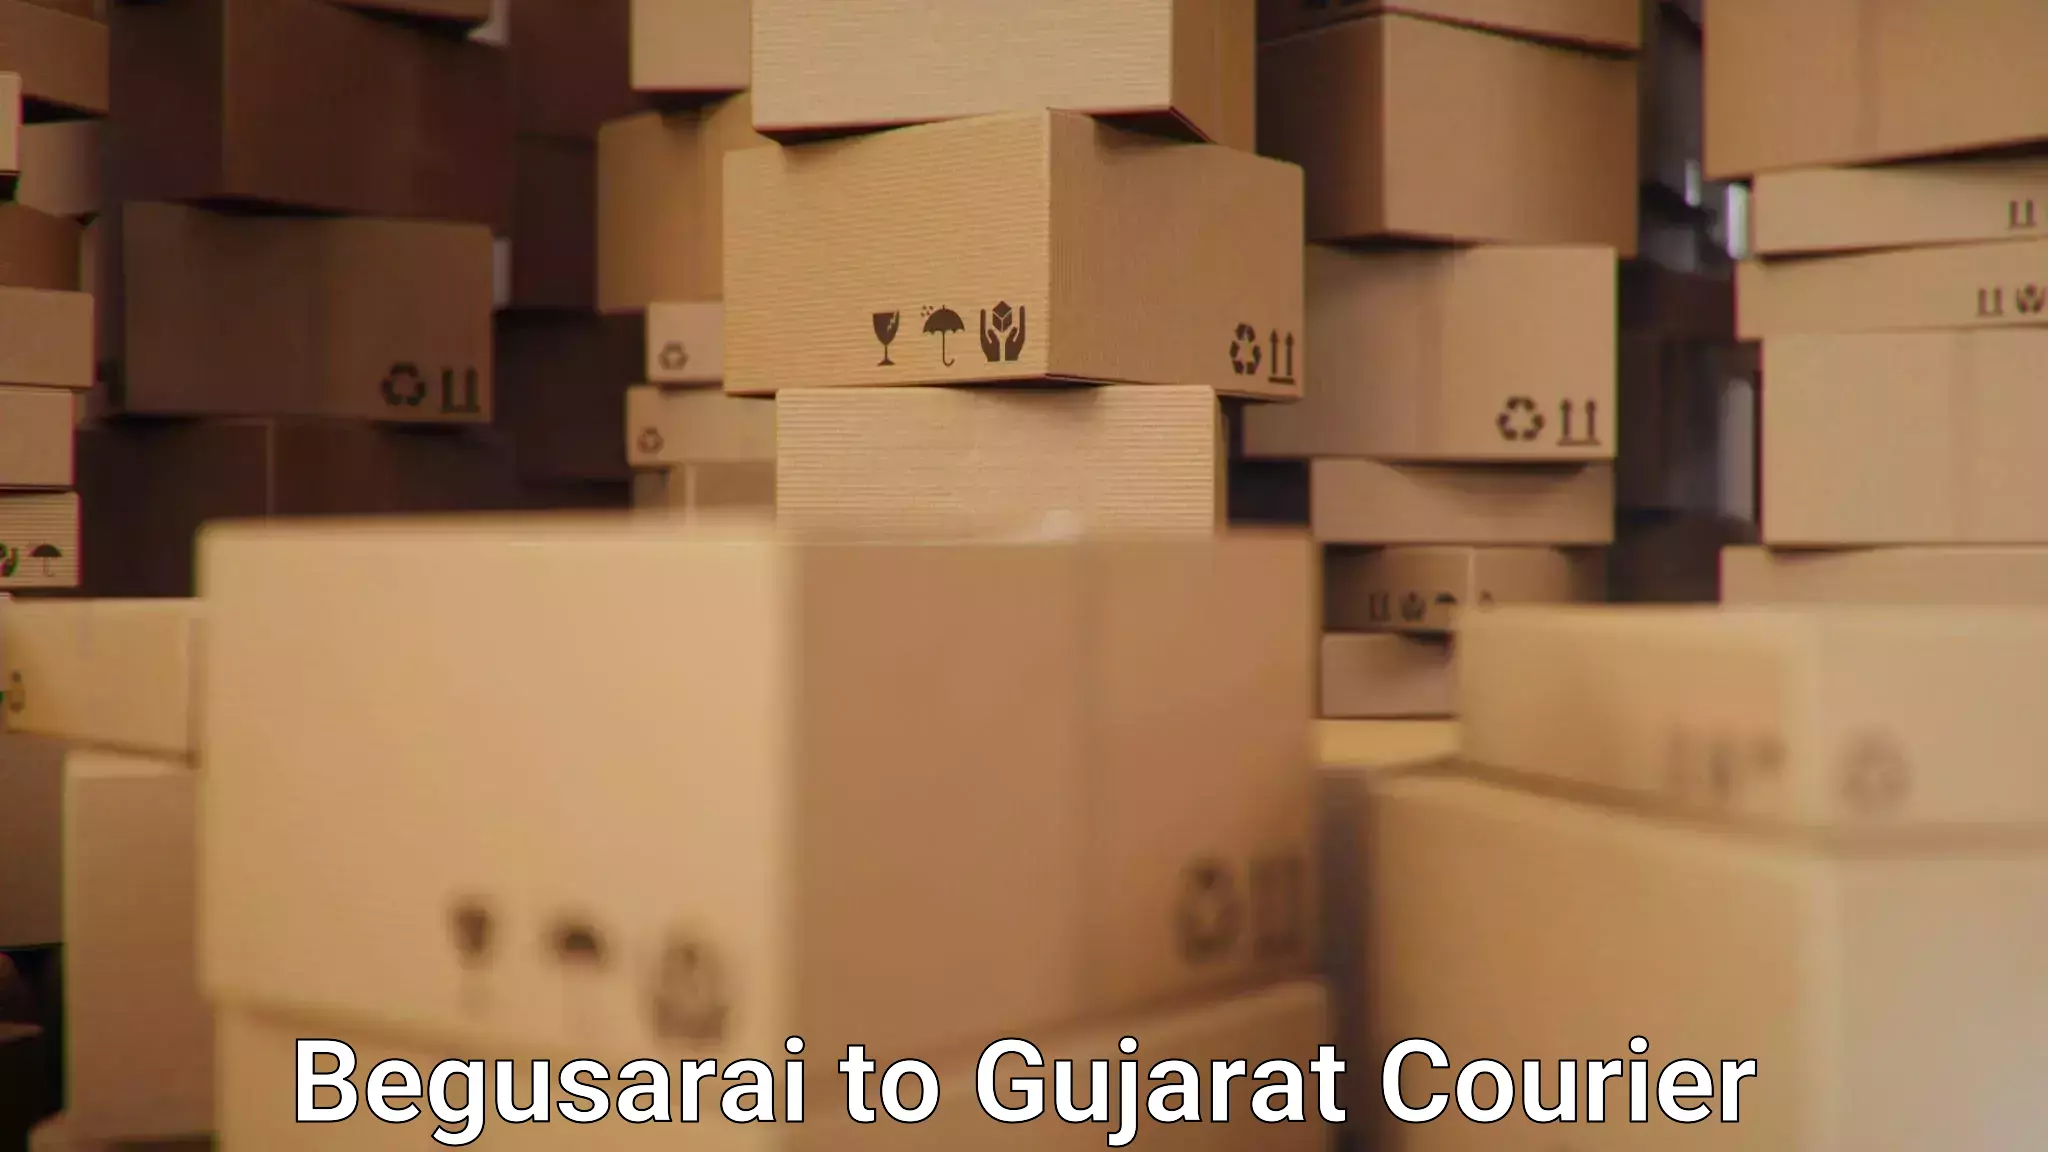 Professional courier services Begusarai to Bhuj